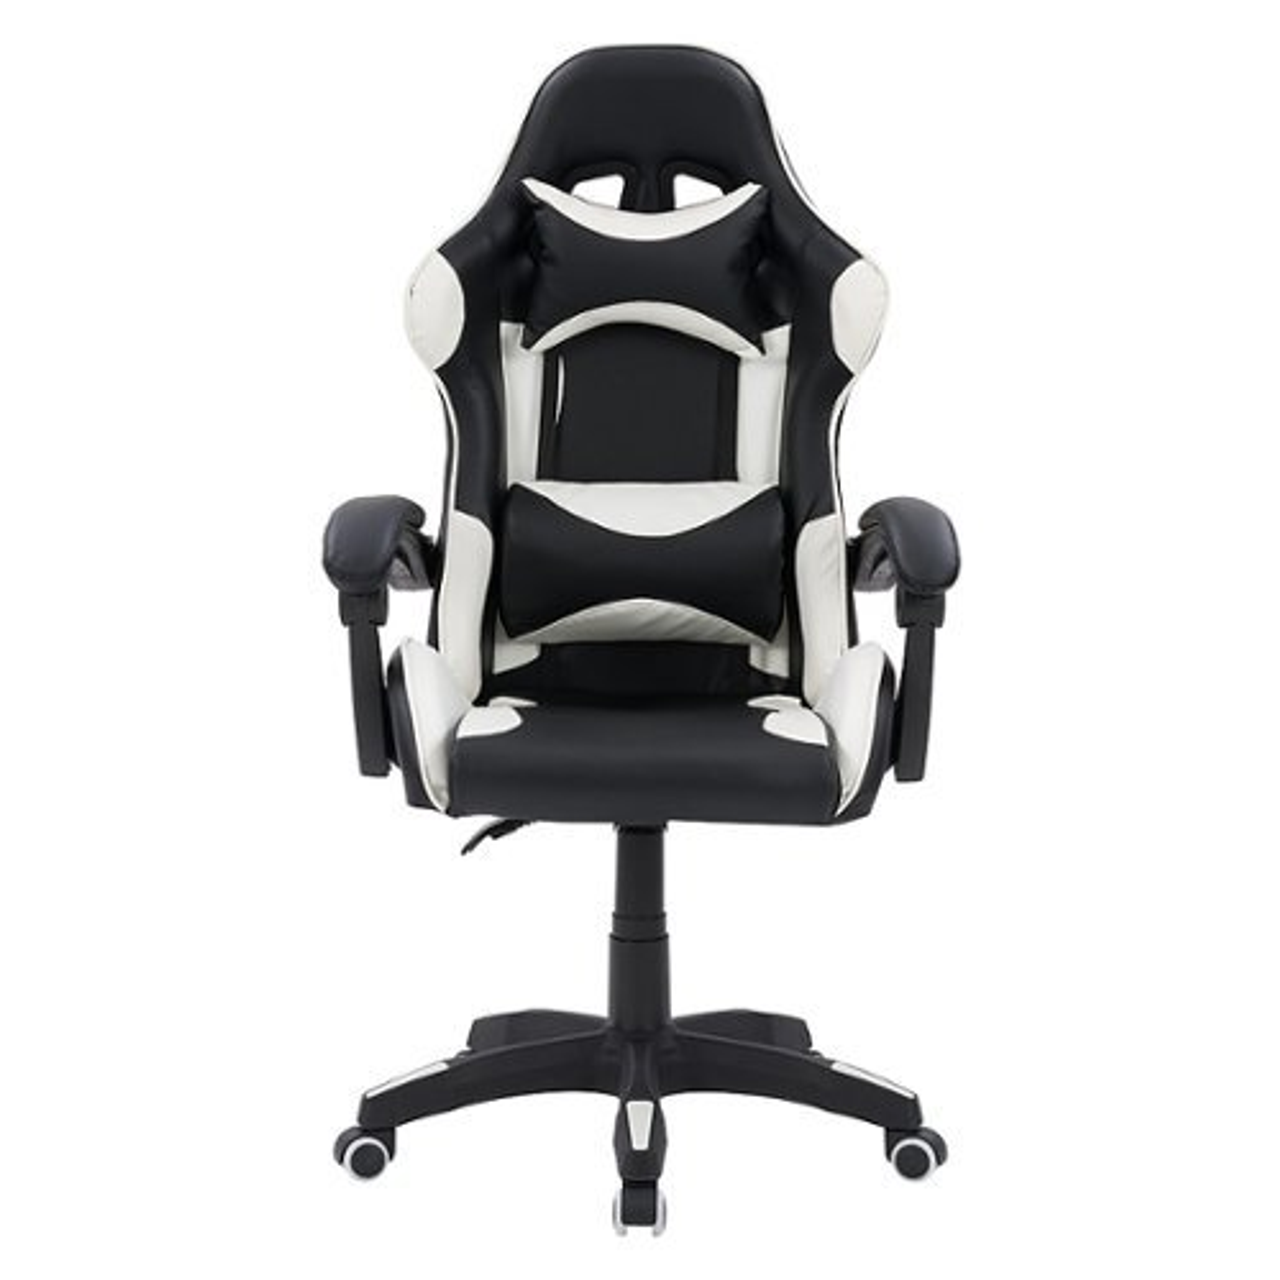 CorLiving Ravagers Gaming Chair in - Black and White